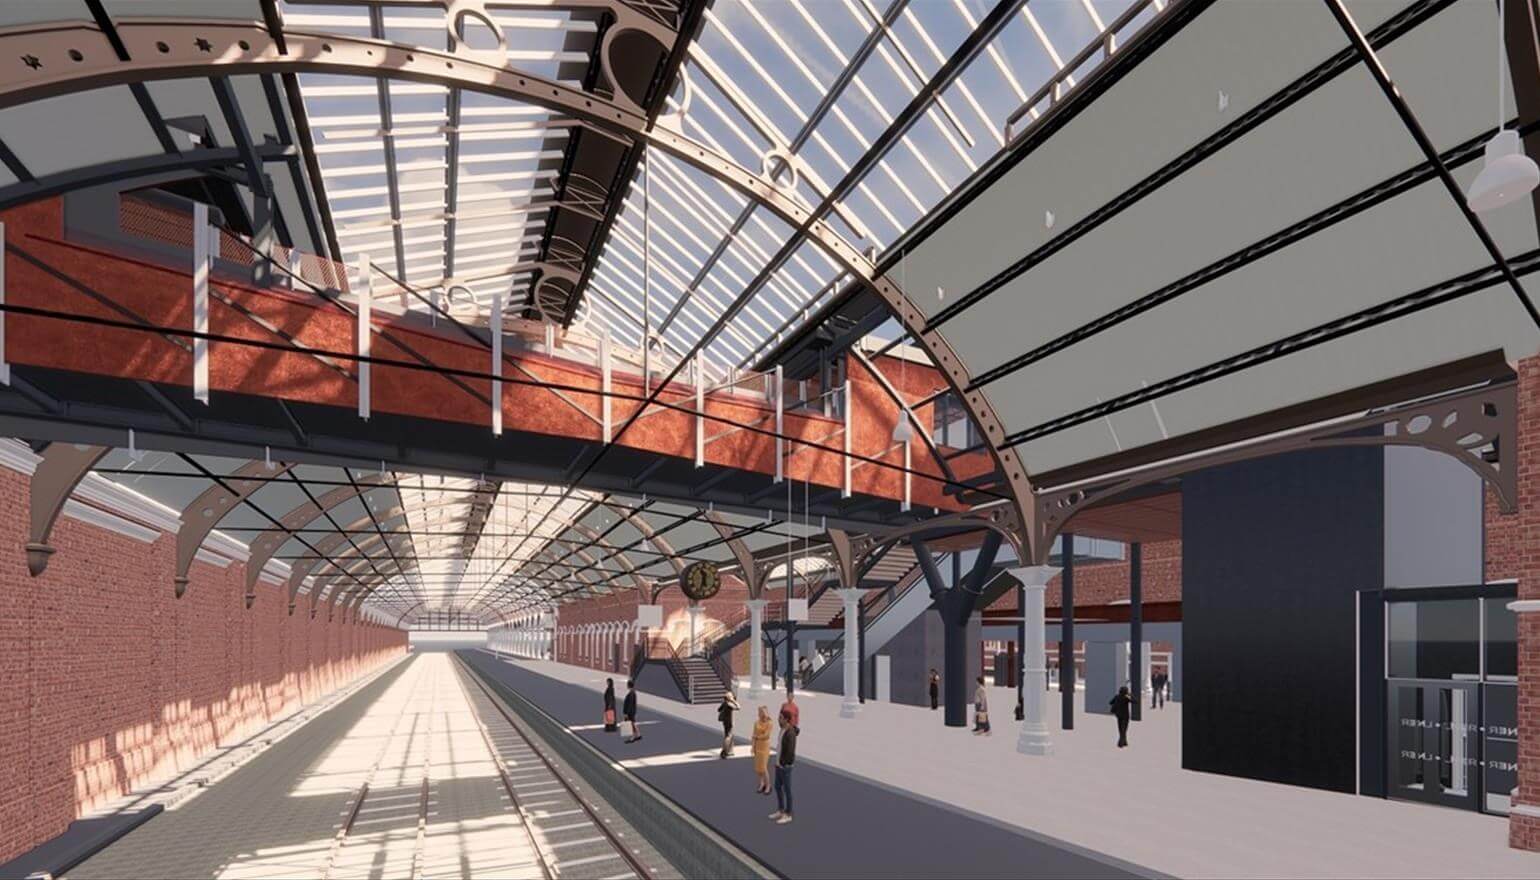 Changes at railway station as major upgrade work continues